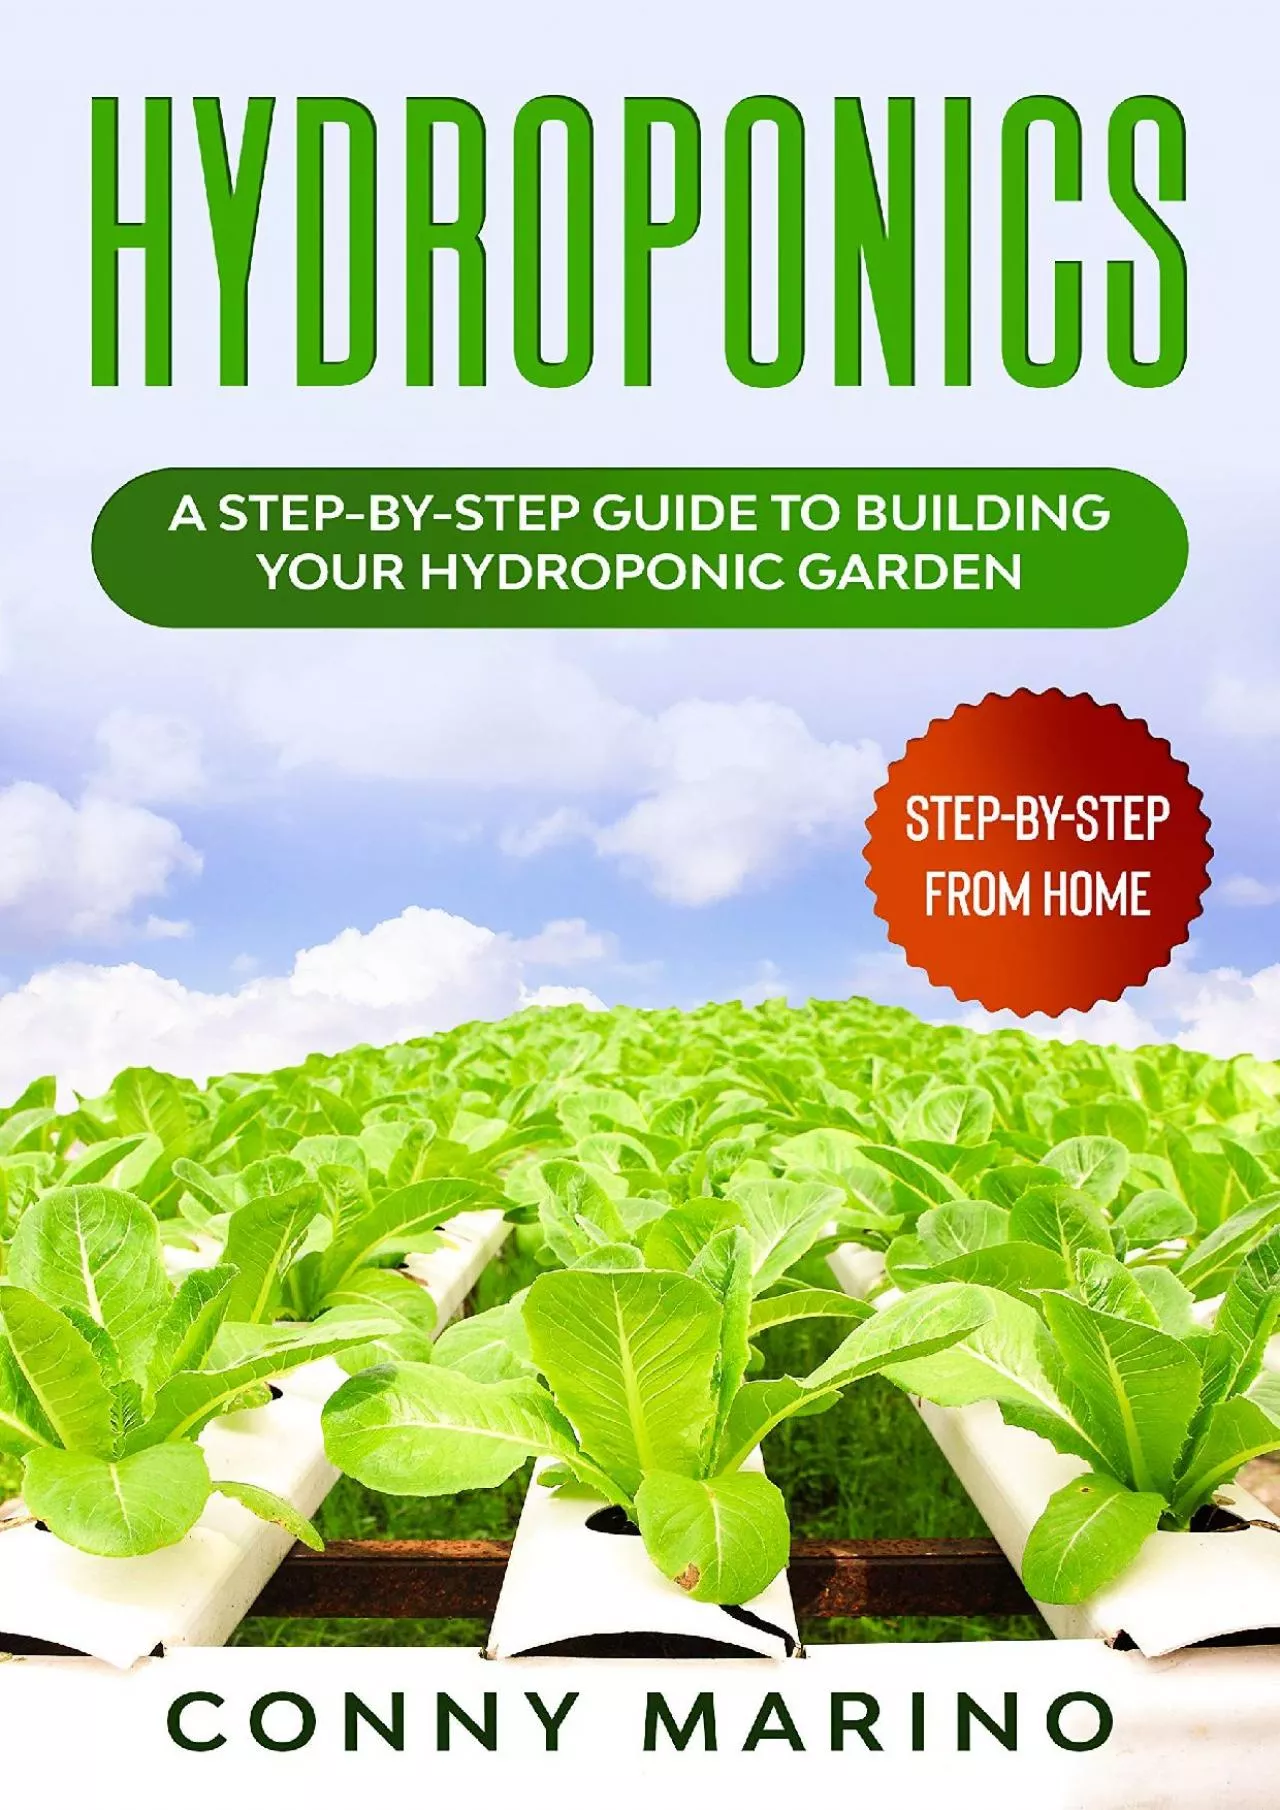 [FREE]-Hydroponics: A Step-by-Step Guide to Building Your Hydroponics Garden